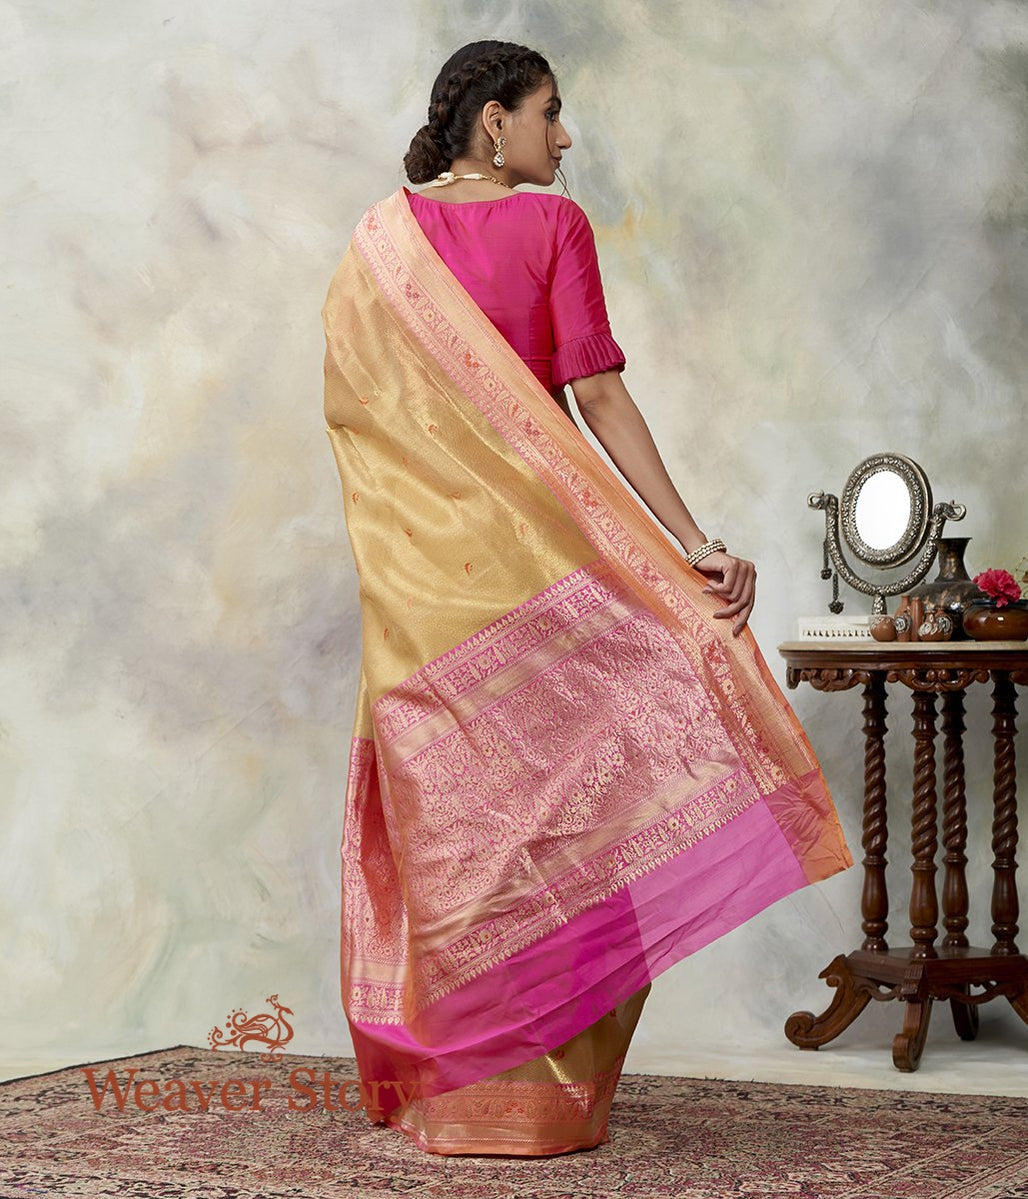 Handwoven_Gold_Kora_Tanchoi_Saree_with_Contrast_Border_WeaverStory_03